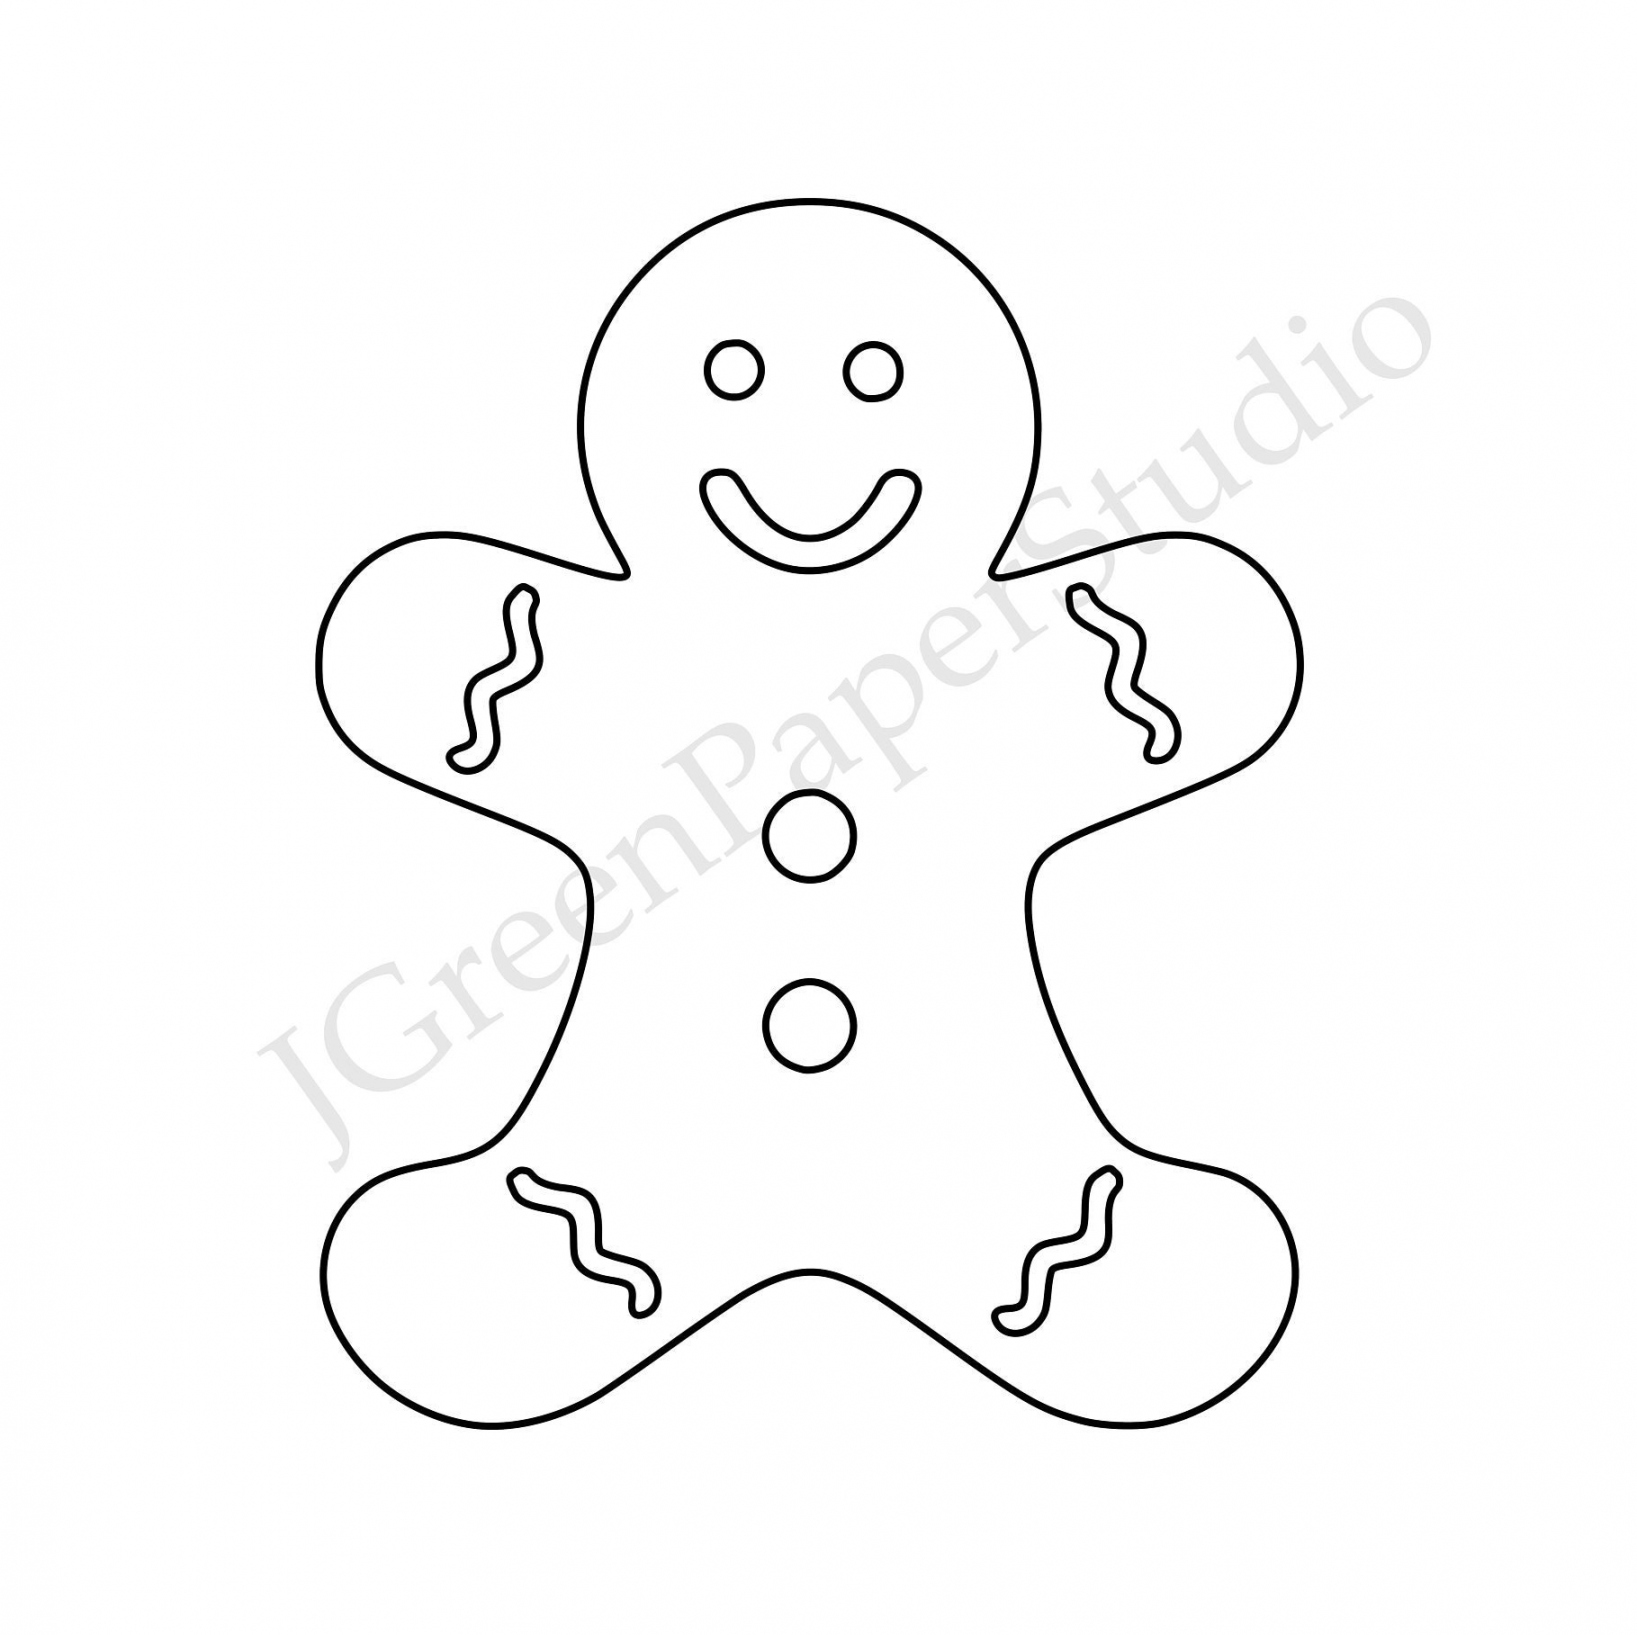 Printable Gingerbread Man Template-PDF Digital Download Cookie Kids Holiday  Coloring Page Kids Craft Stencil -inch Gingerbread Scrapbooking - FREE Printables - Gingerbread Stencils